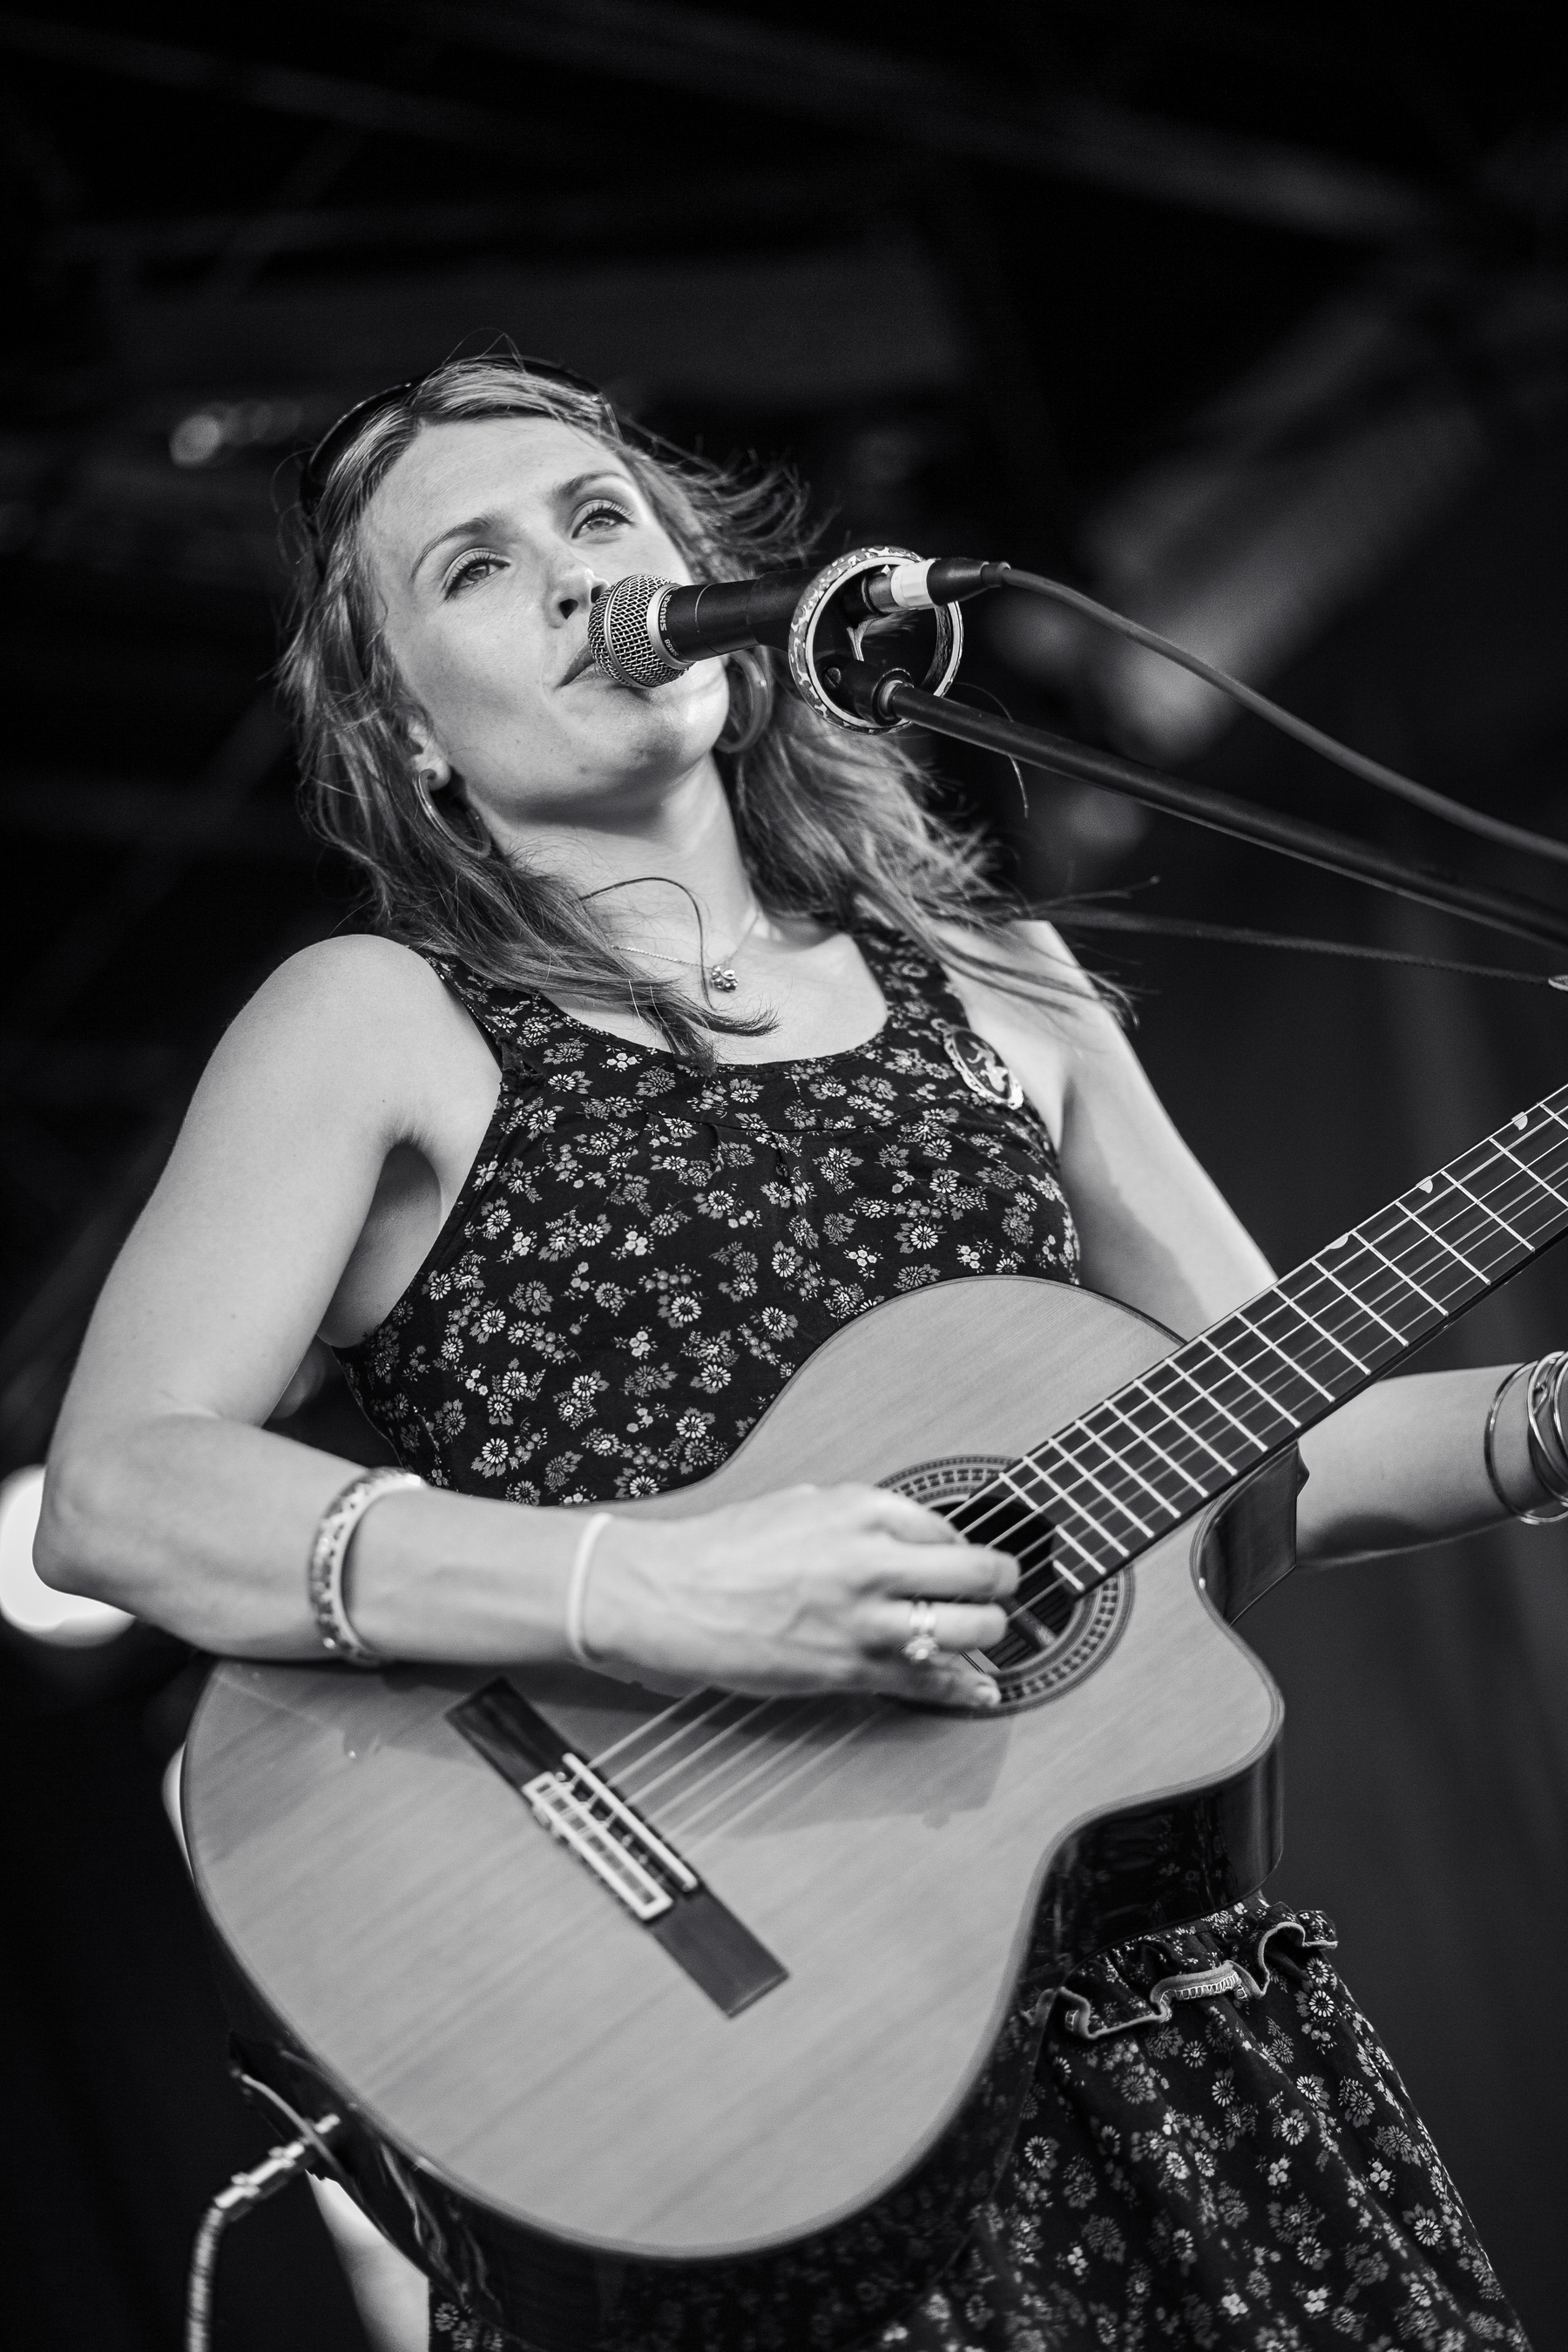 Clare Bowditch playing guitar and singing into a microphone at a music festival.